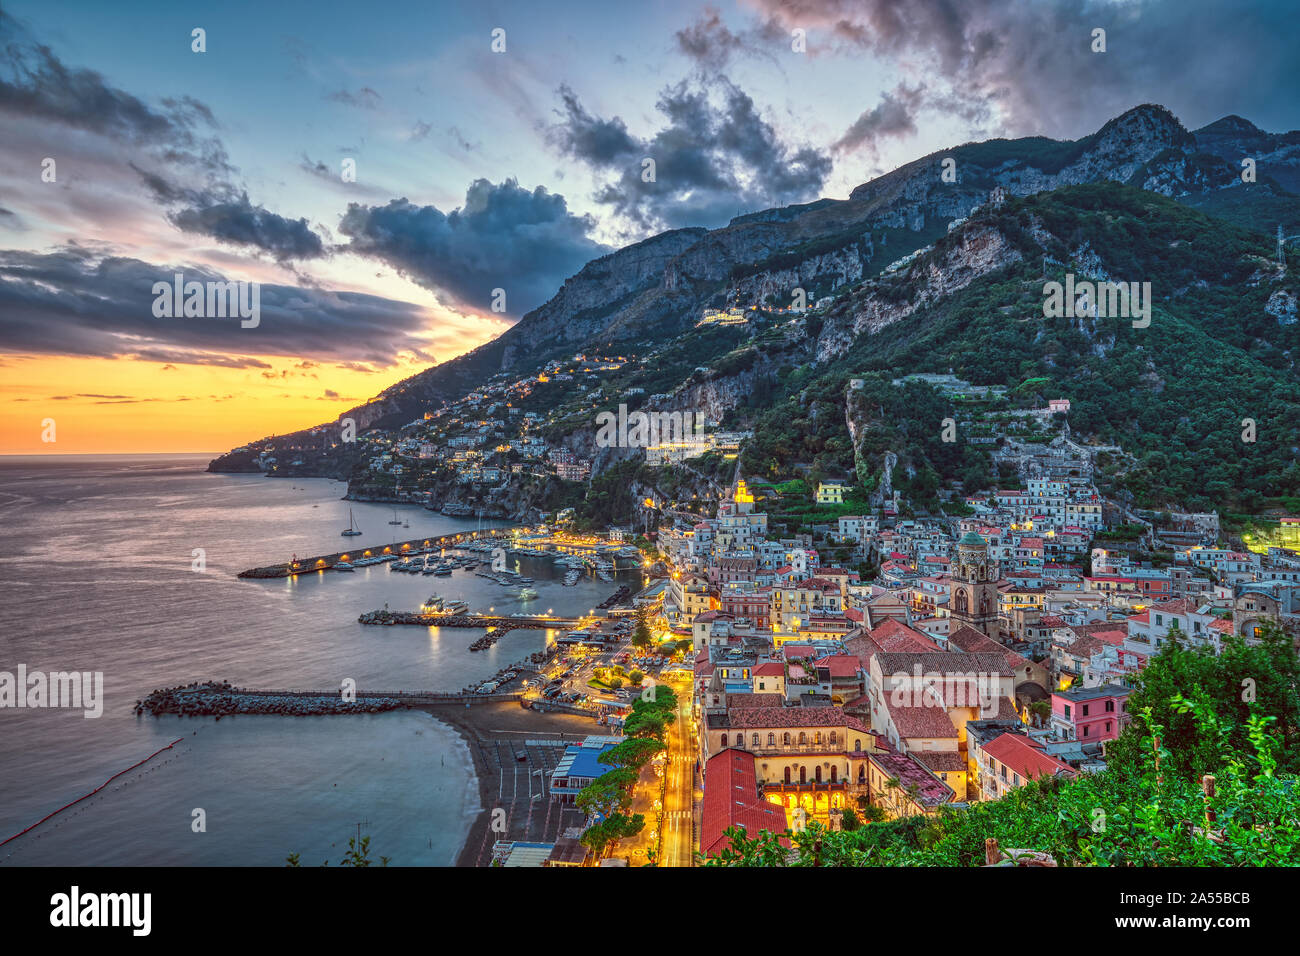 Sunset in Amalfi on the coast of the same name in Italy Stock Photo